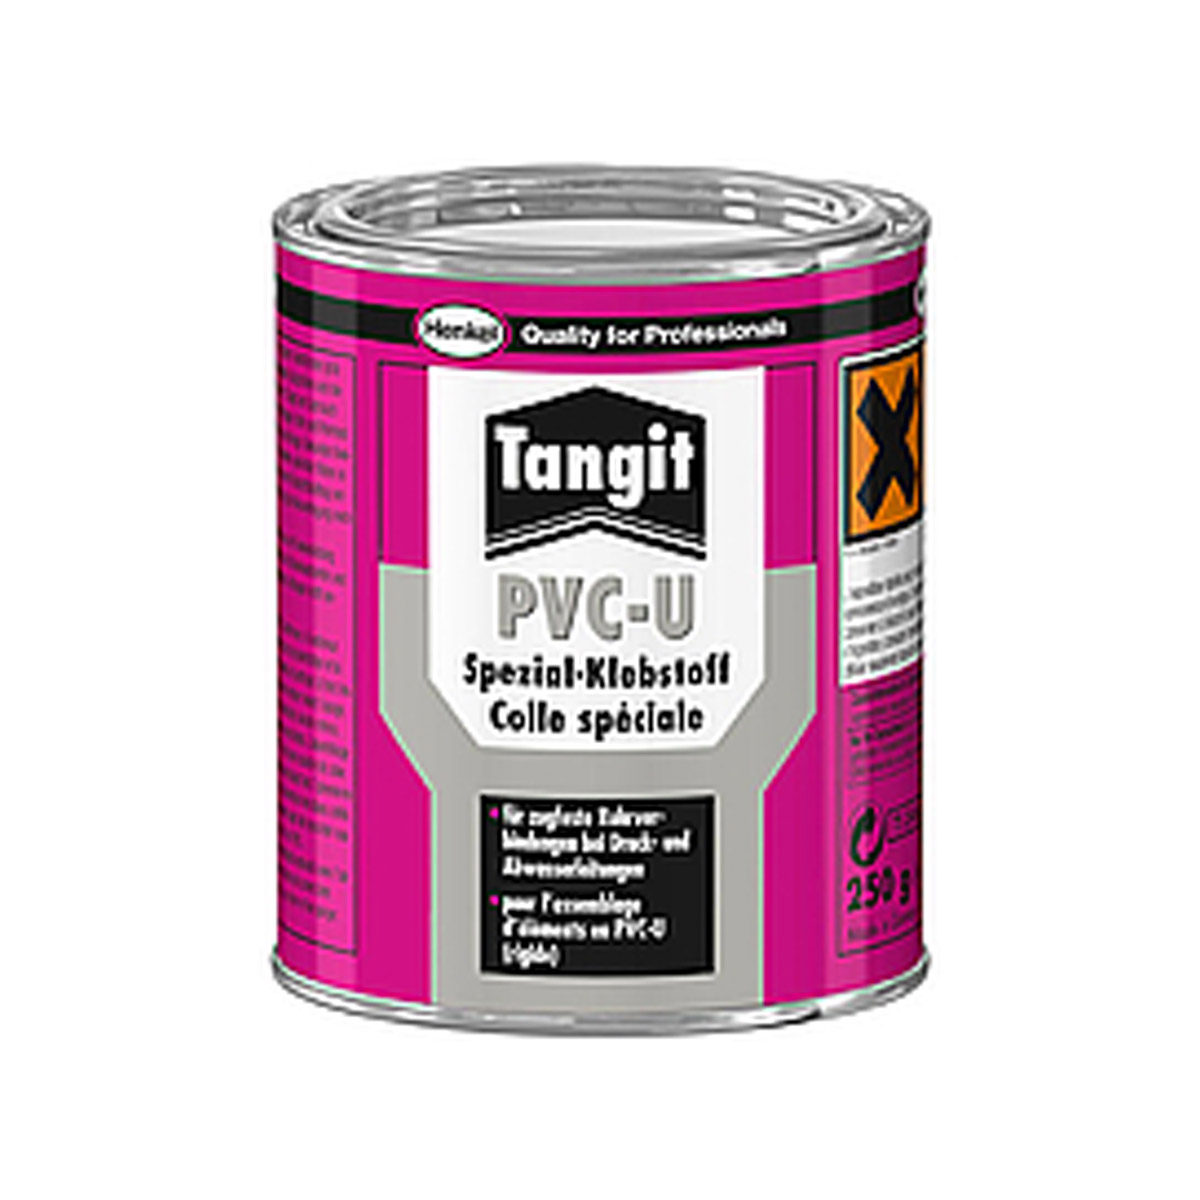 Solvent Cement for PVC-U
"TANGIT" 125g Solvent Cement for PVC-U
"TANGIT" 125g